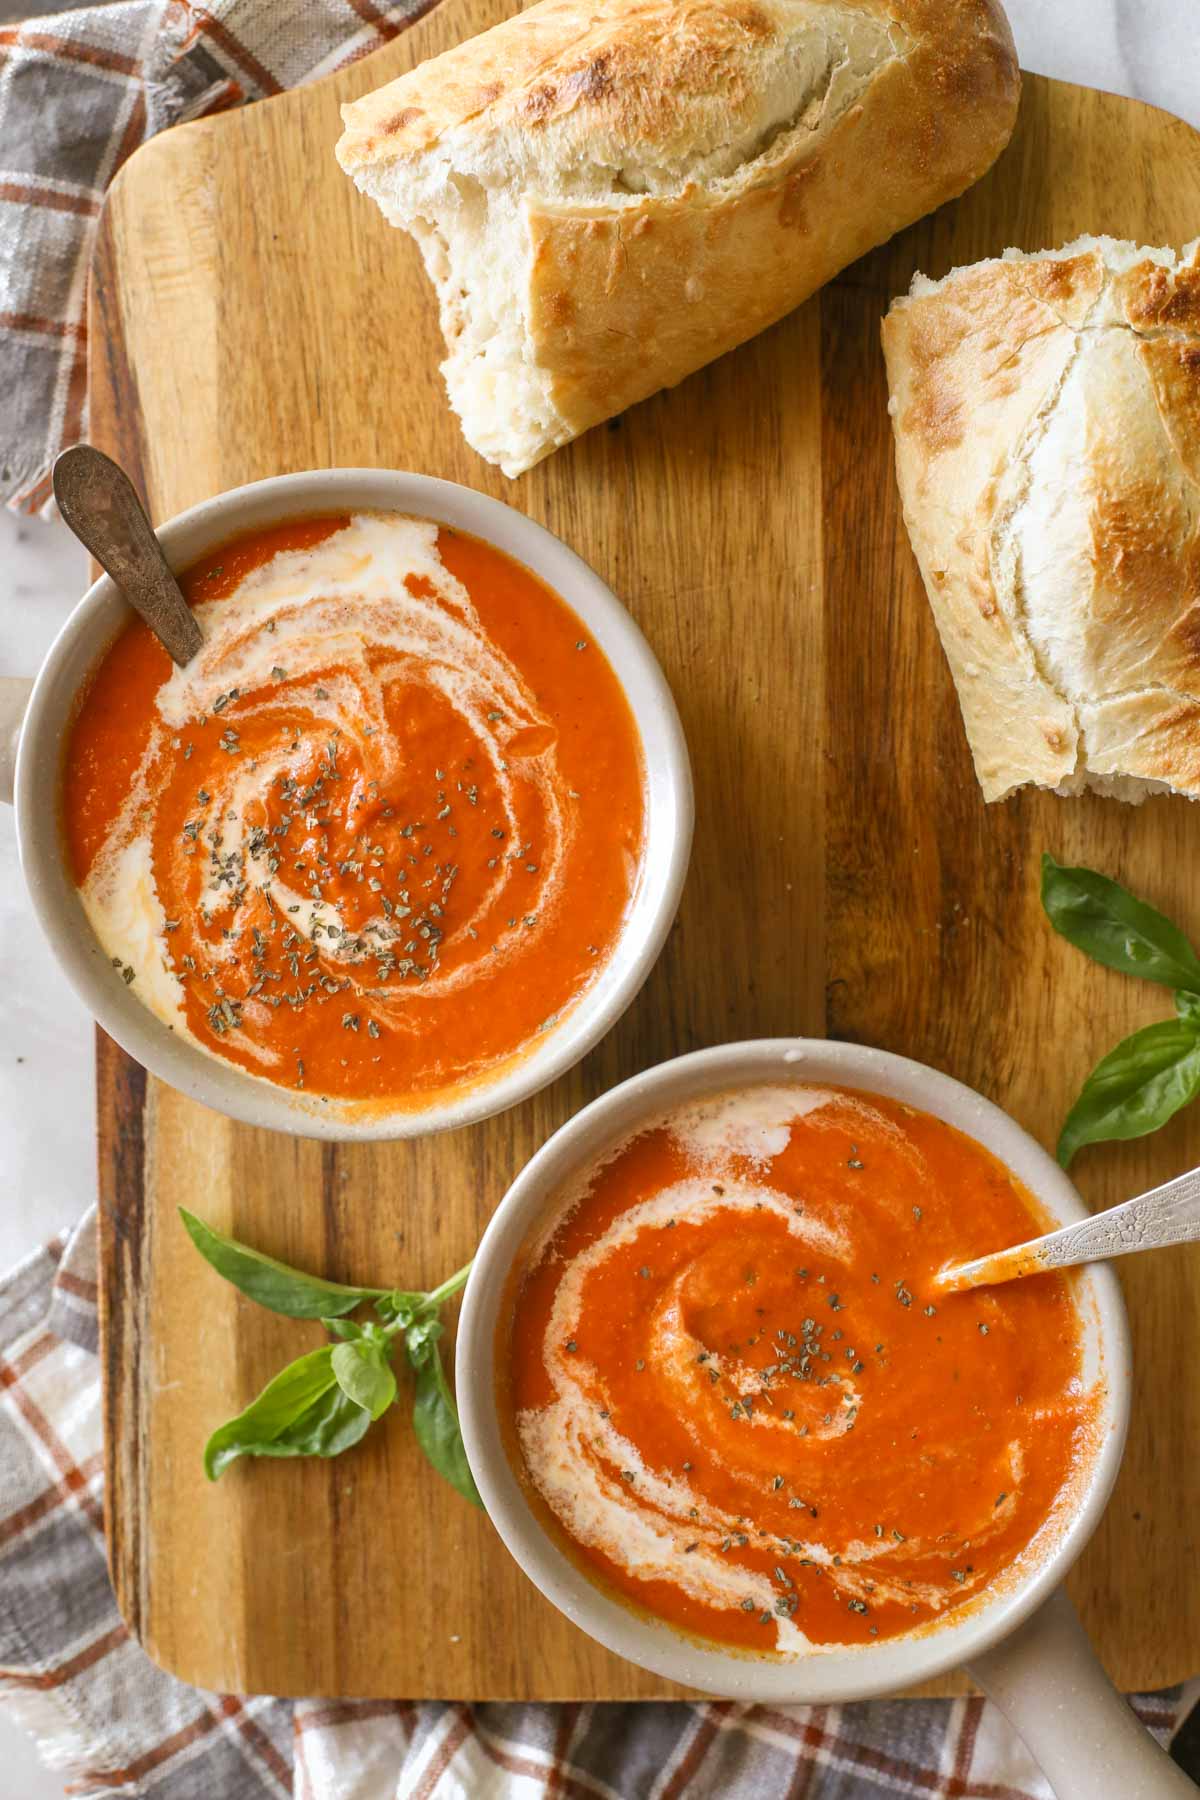 Overhead shot of two bowls of Creamy Balsamic Tomato Soup on a wood cutting board, along with two pieces of torn crusty bread.  